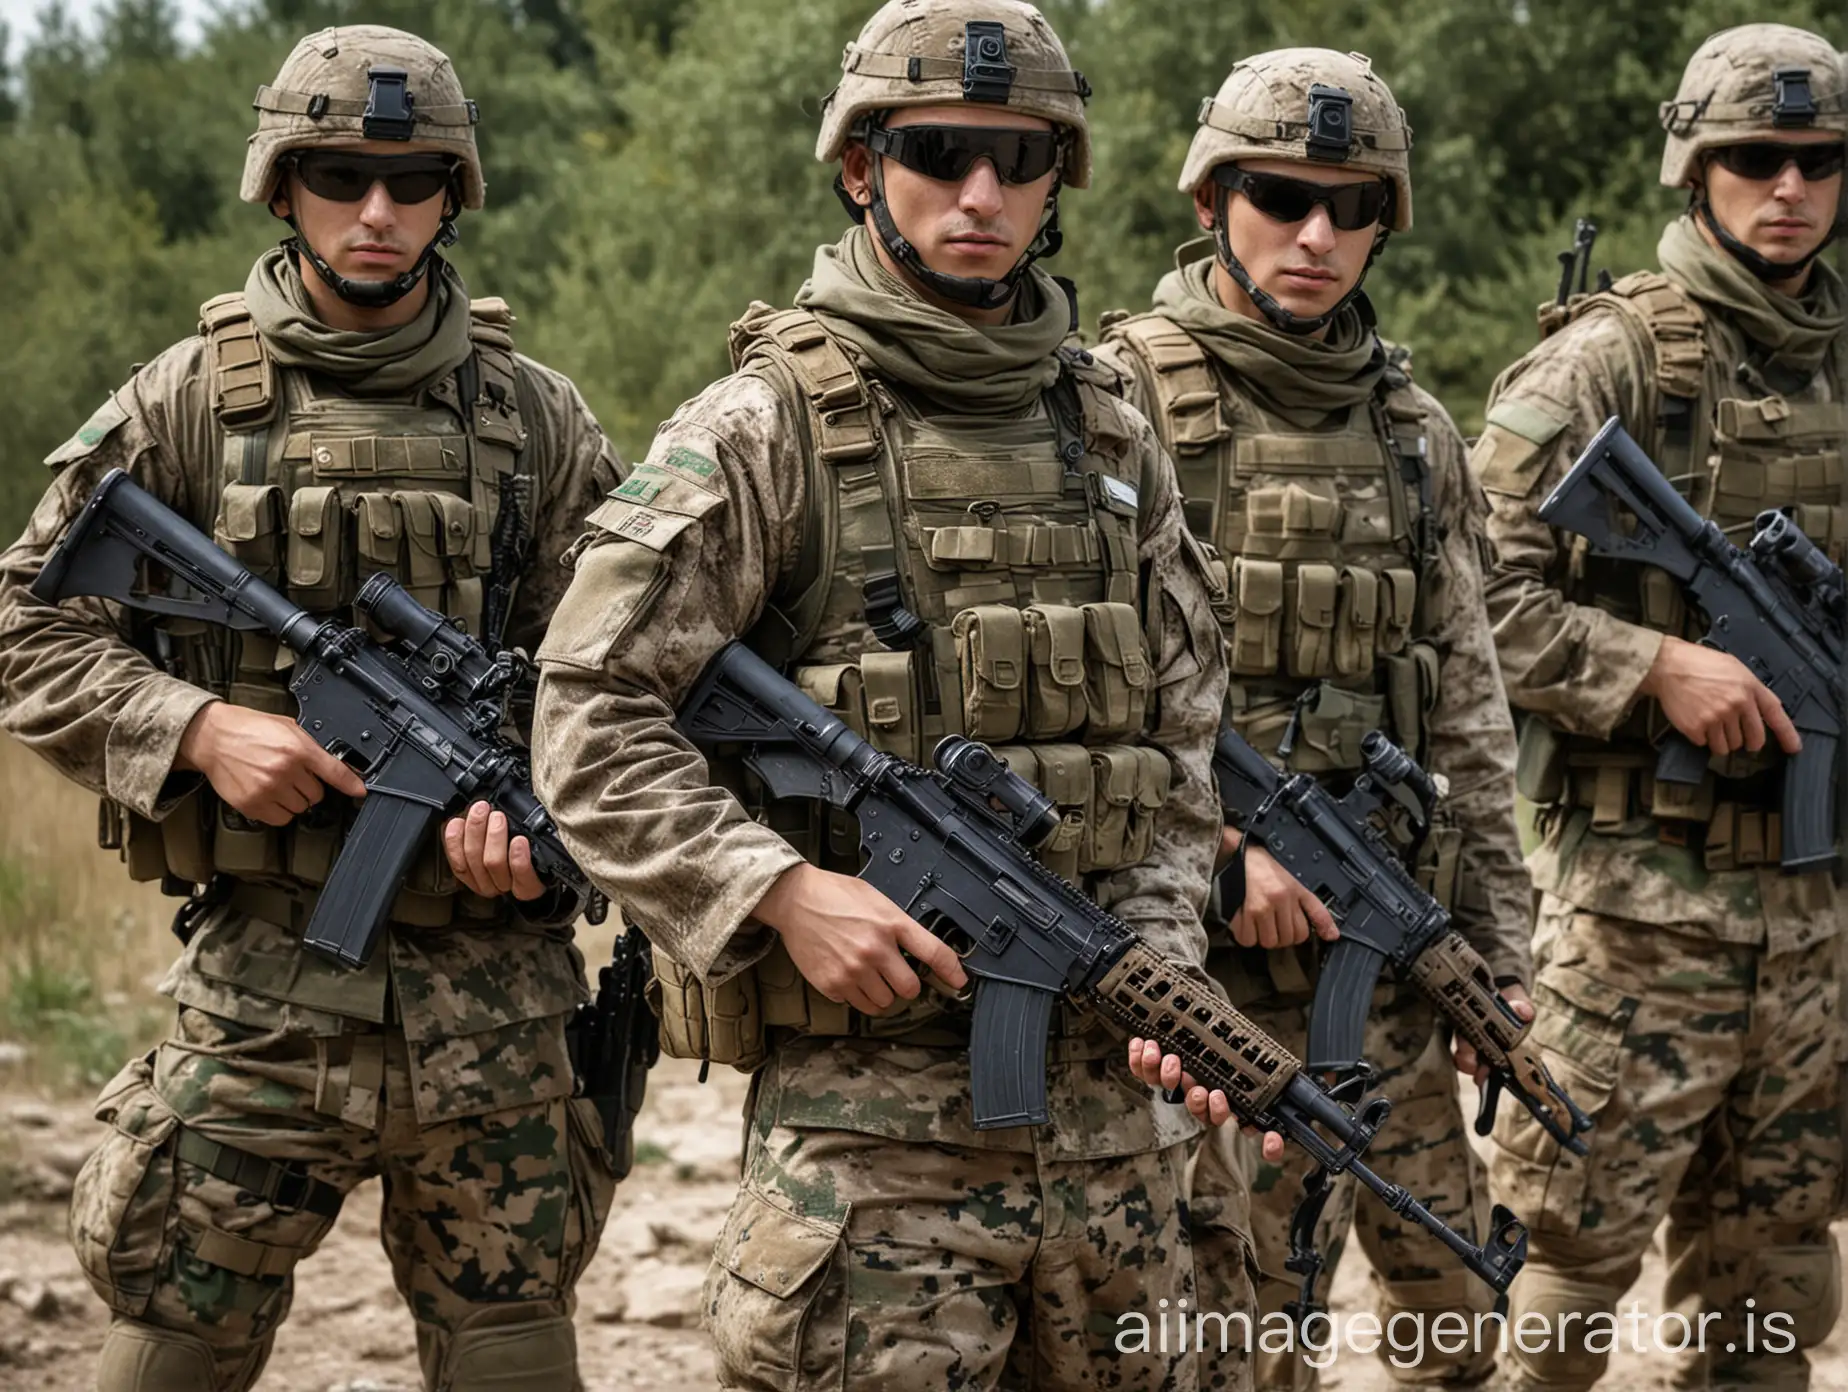 Modern-Bulgarian-Soldiers-in-Digital-Camouflage-with-AK47-Weapons